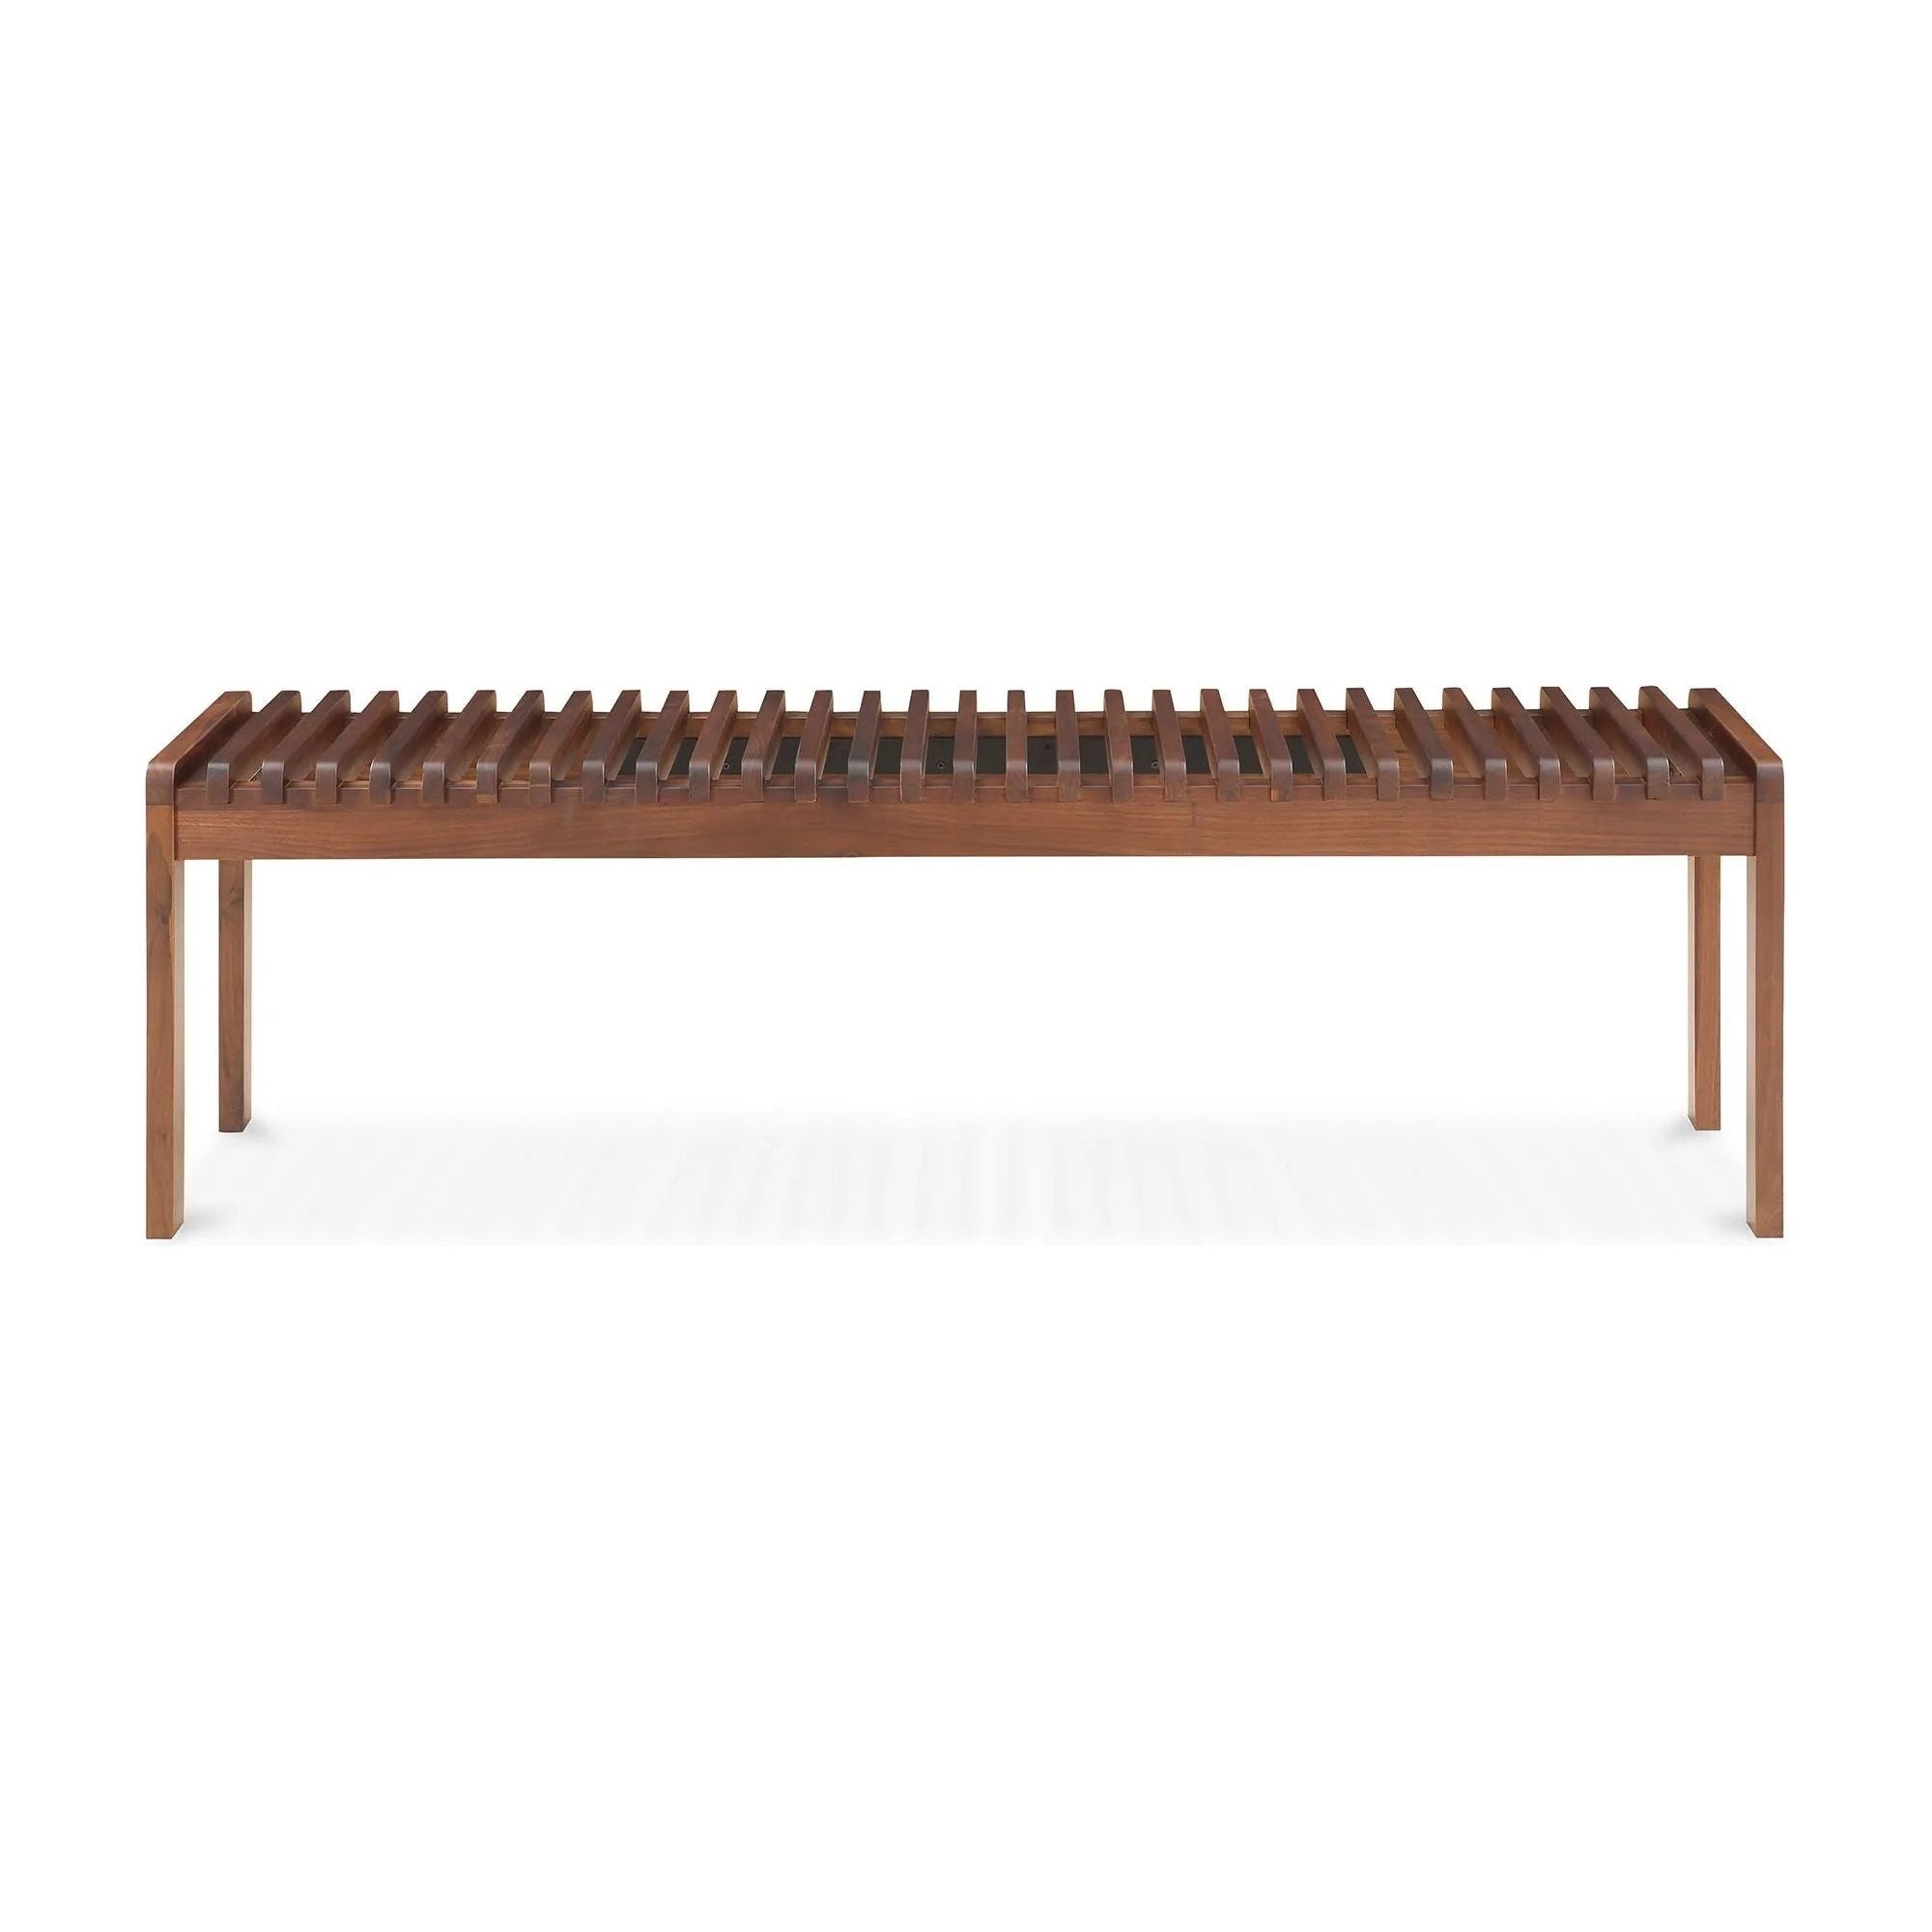 A pinch of panache with slat detailing, the solid wood Rohe bench is an ode to mid-century craftsmanship. A celebration of versatility, style this accent piece in the bedroom, dining room, living room, bathroom or entryway. Available in oak and walnut, Rohe adds natural allure to any space—this is visual styling made easy Amethyst Home provides interior design, new home construction design consulting, vintage area rugs, and lighting in the Portland metro area.